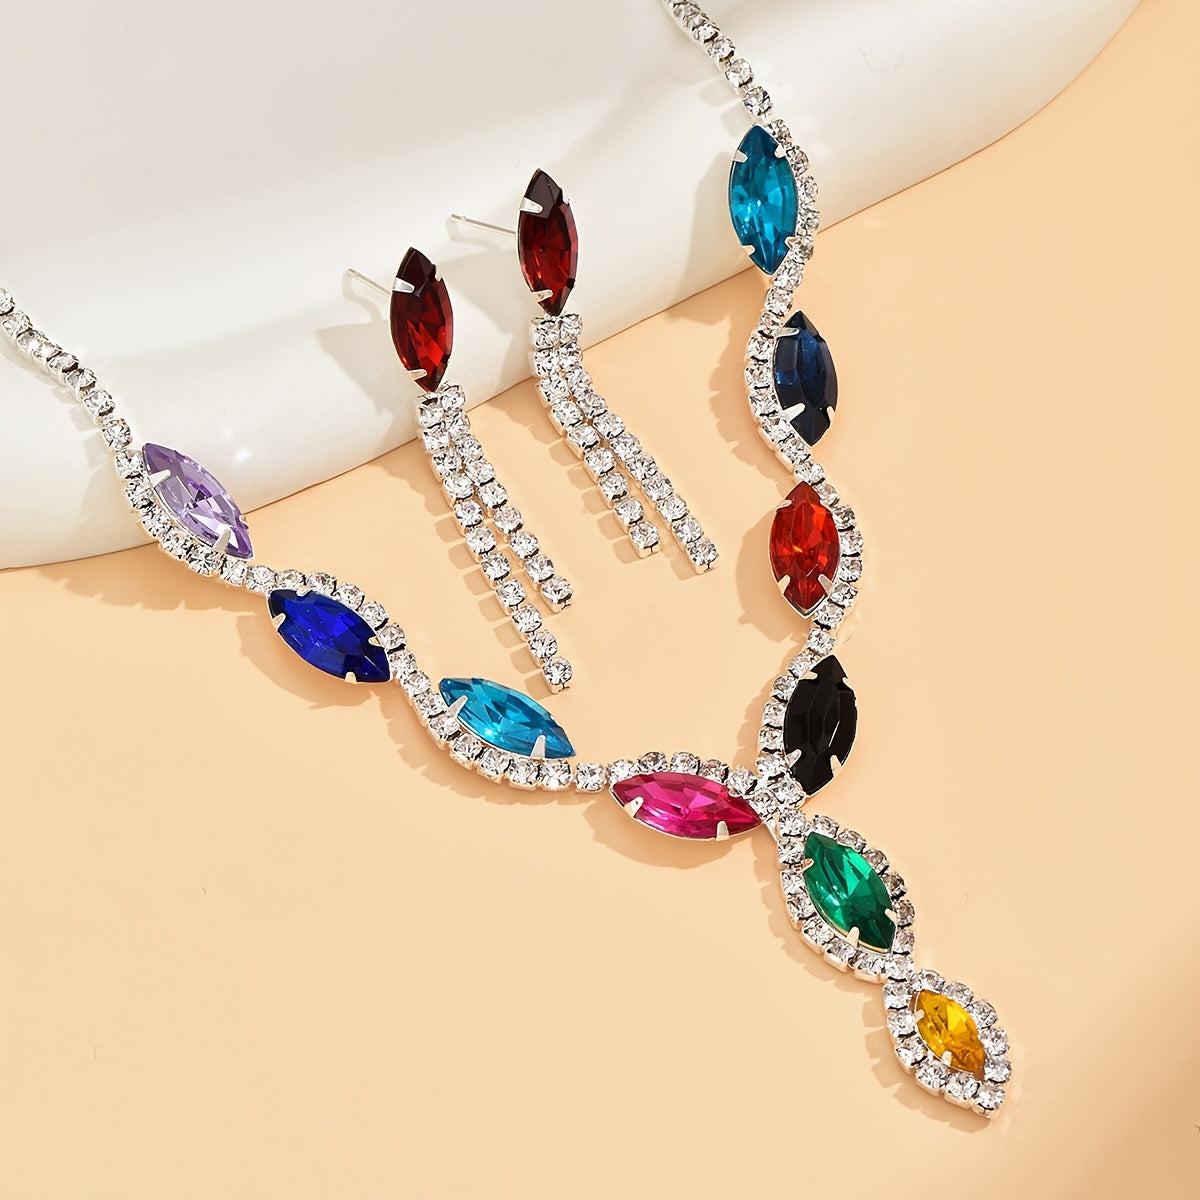 2 pieces Stunning Women's Crystal Necklace and Earrings Set - Vibrant Colors and Sparkling Crystals for a Glamorous Look